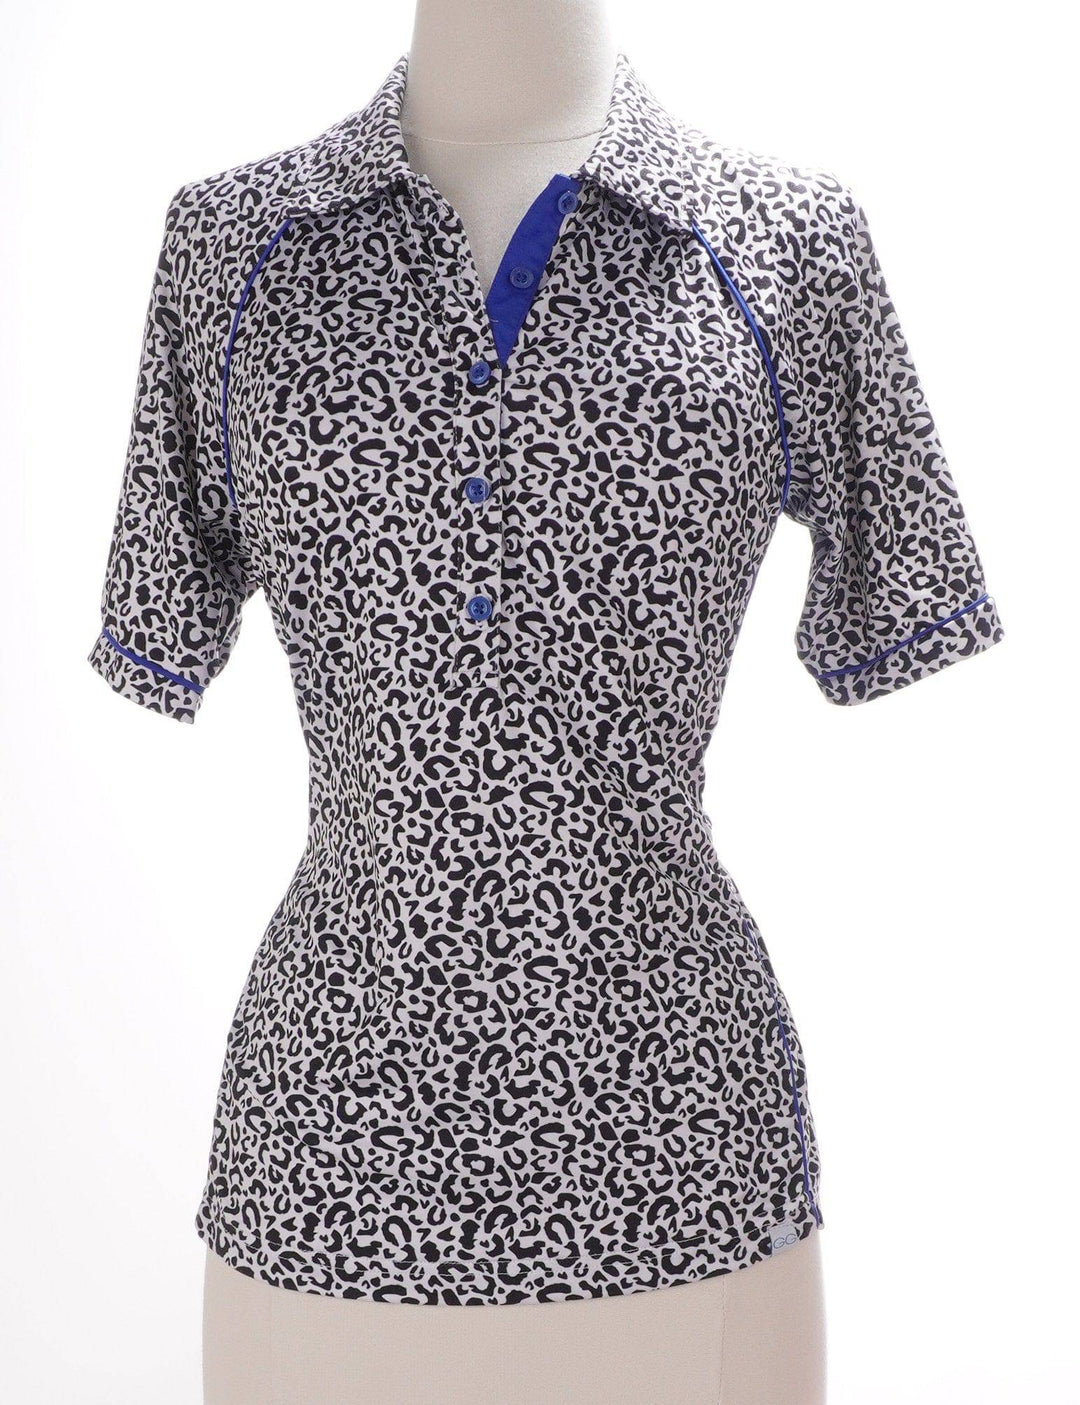 GGblue Small / Multicolored / Consigned GGBlue Cheetah Short Sleeve - Black/White/Blue - Size Small